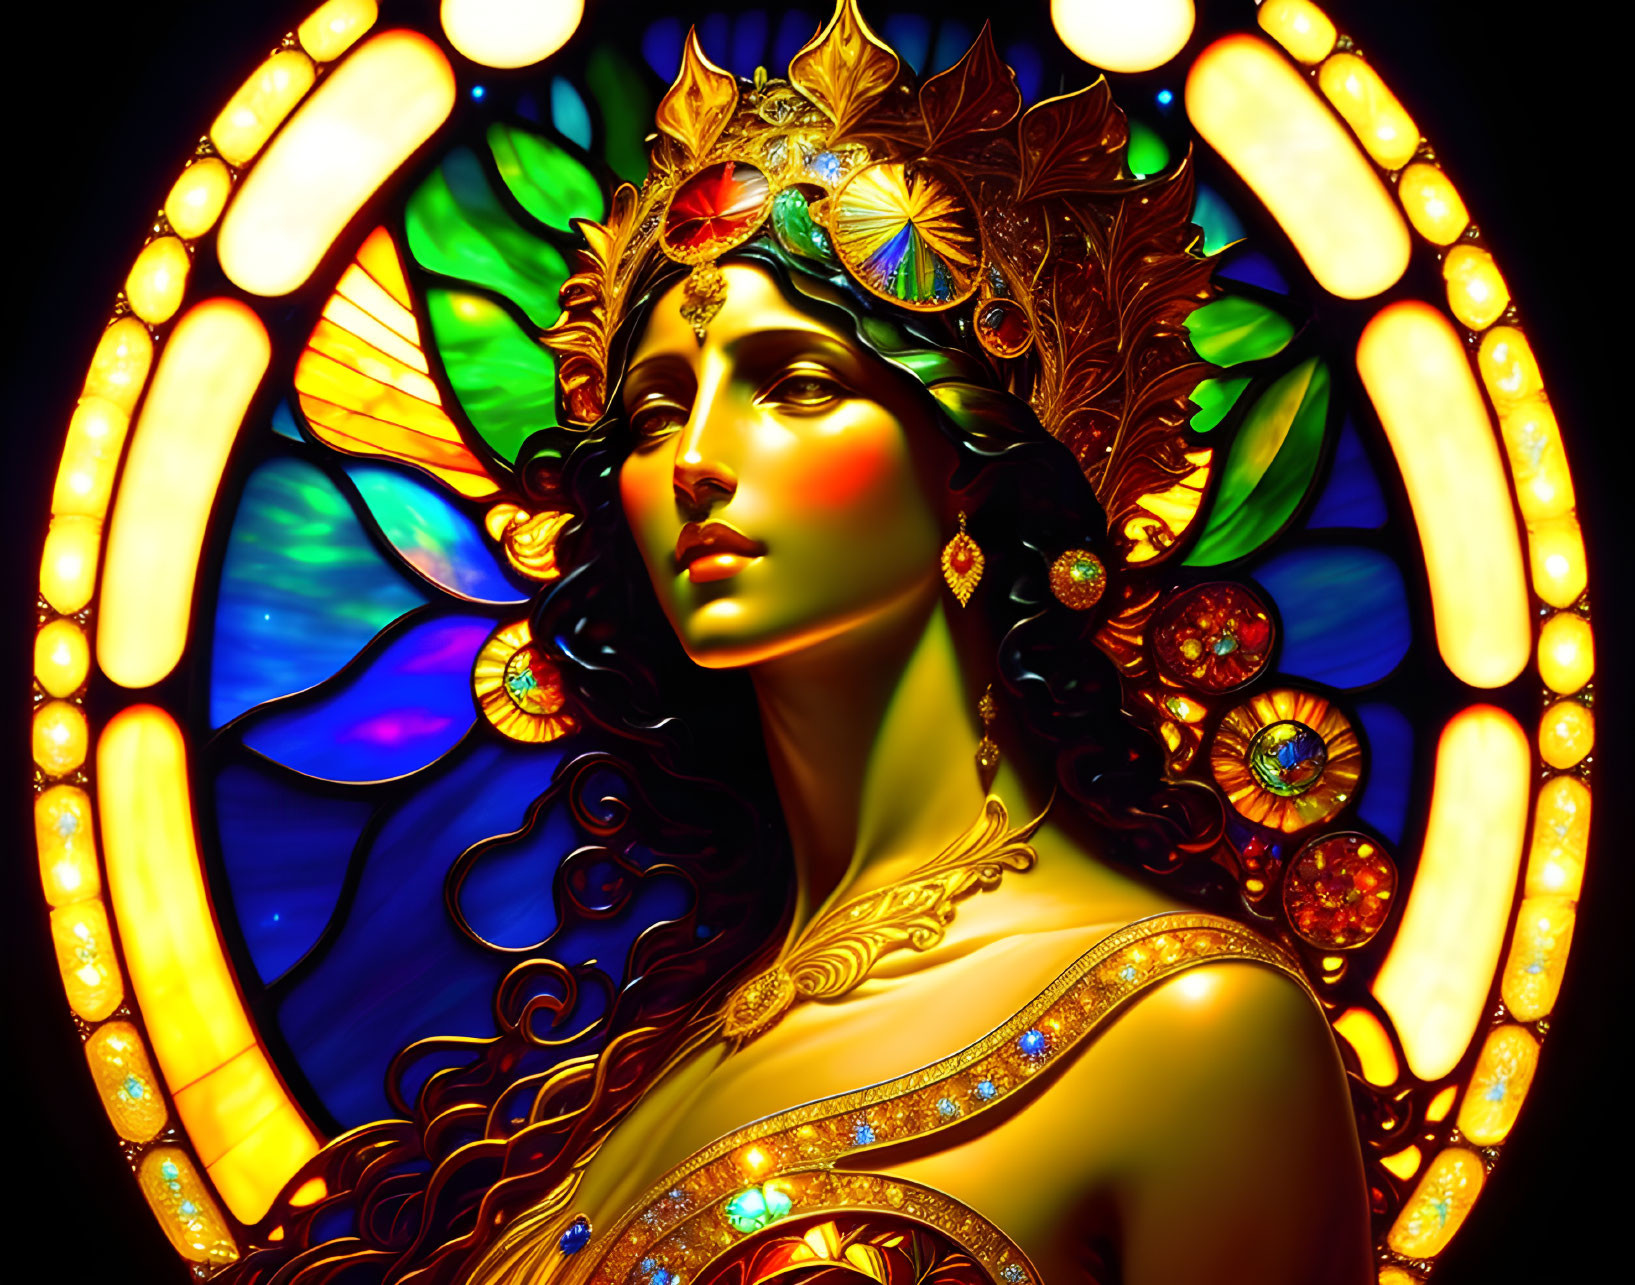 Colorful artwork of woman with intricate headdress on luminous stained-glass background